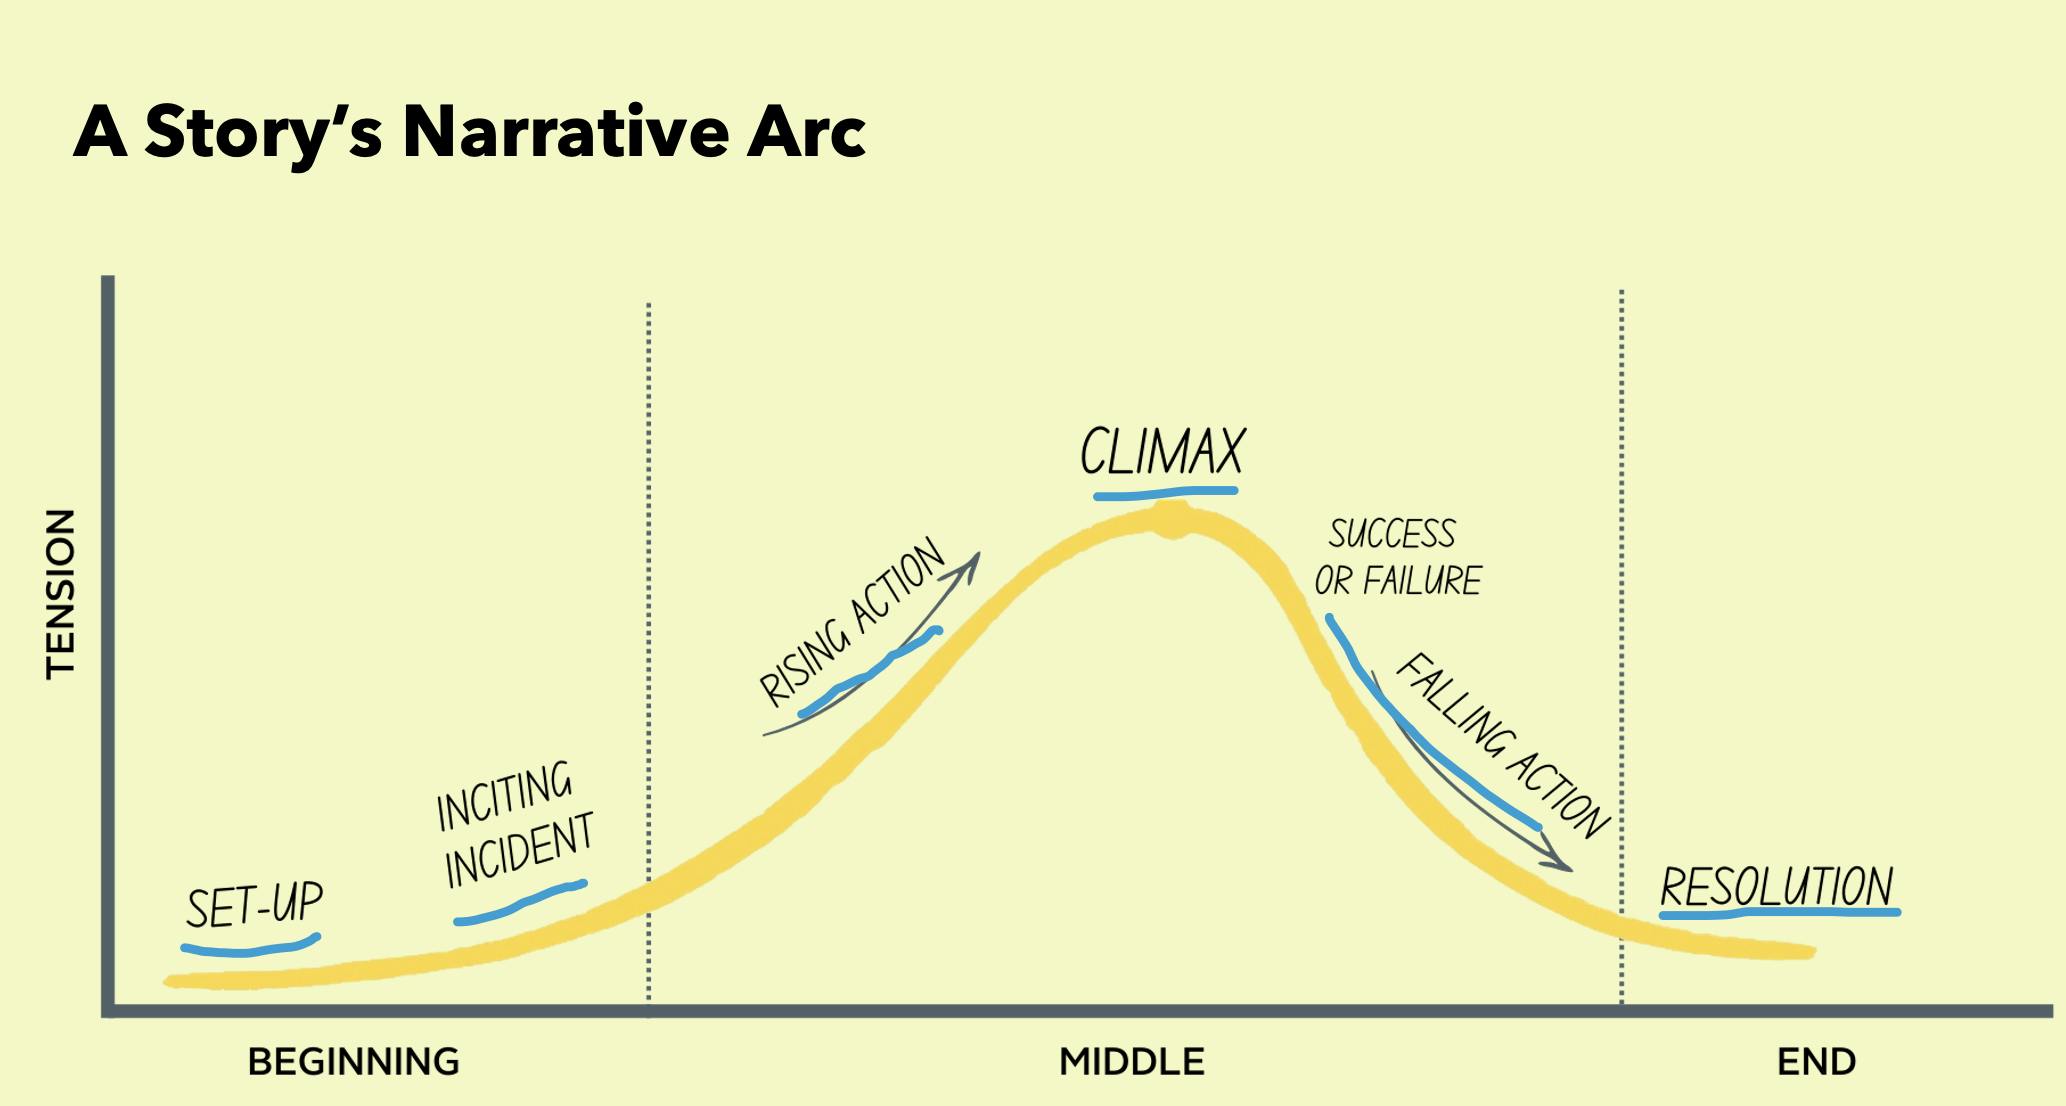 A Story's Narrative Arc image shown as a graph. Set-up, inciting incident, rising action, climax, falling action, resolution